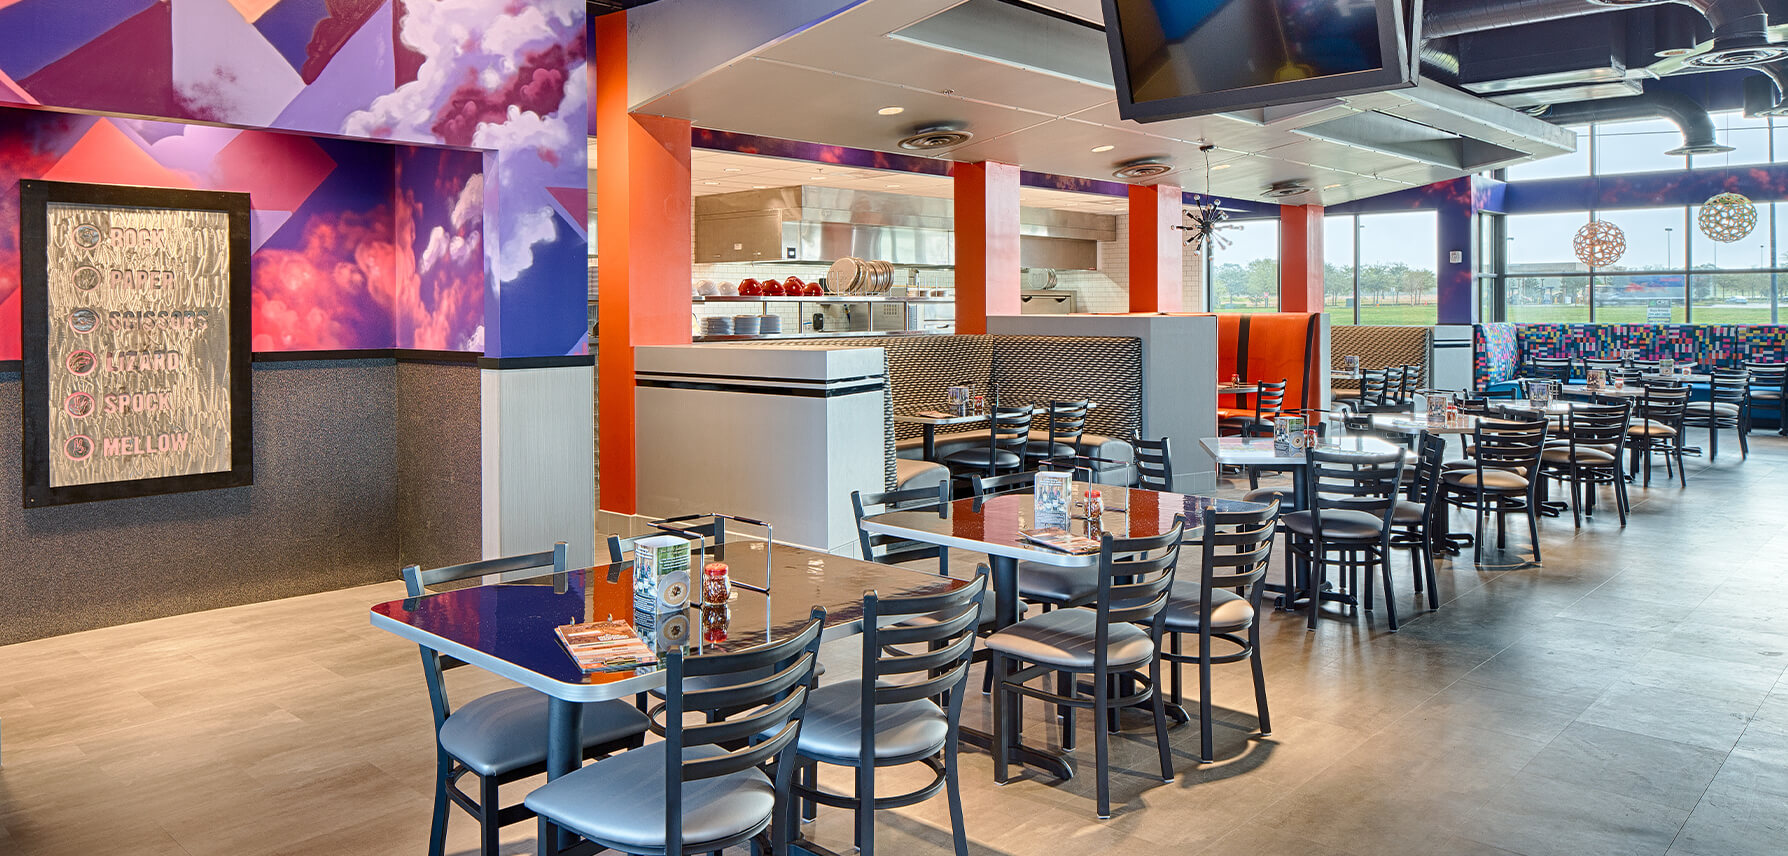 Melissa Anne chairs in fast casual restaurant.